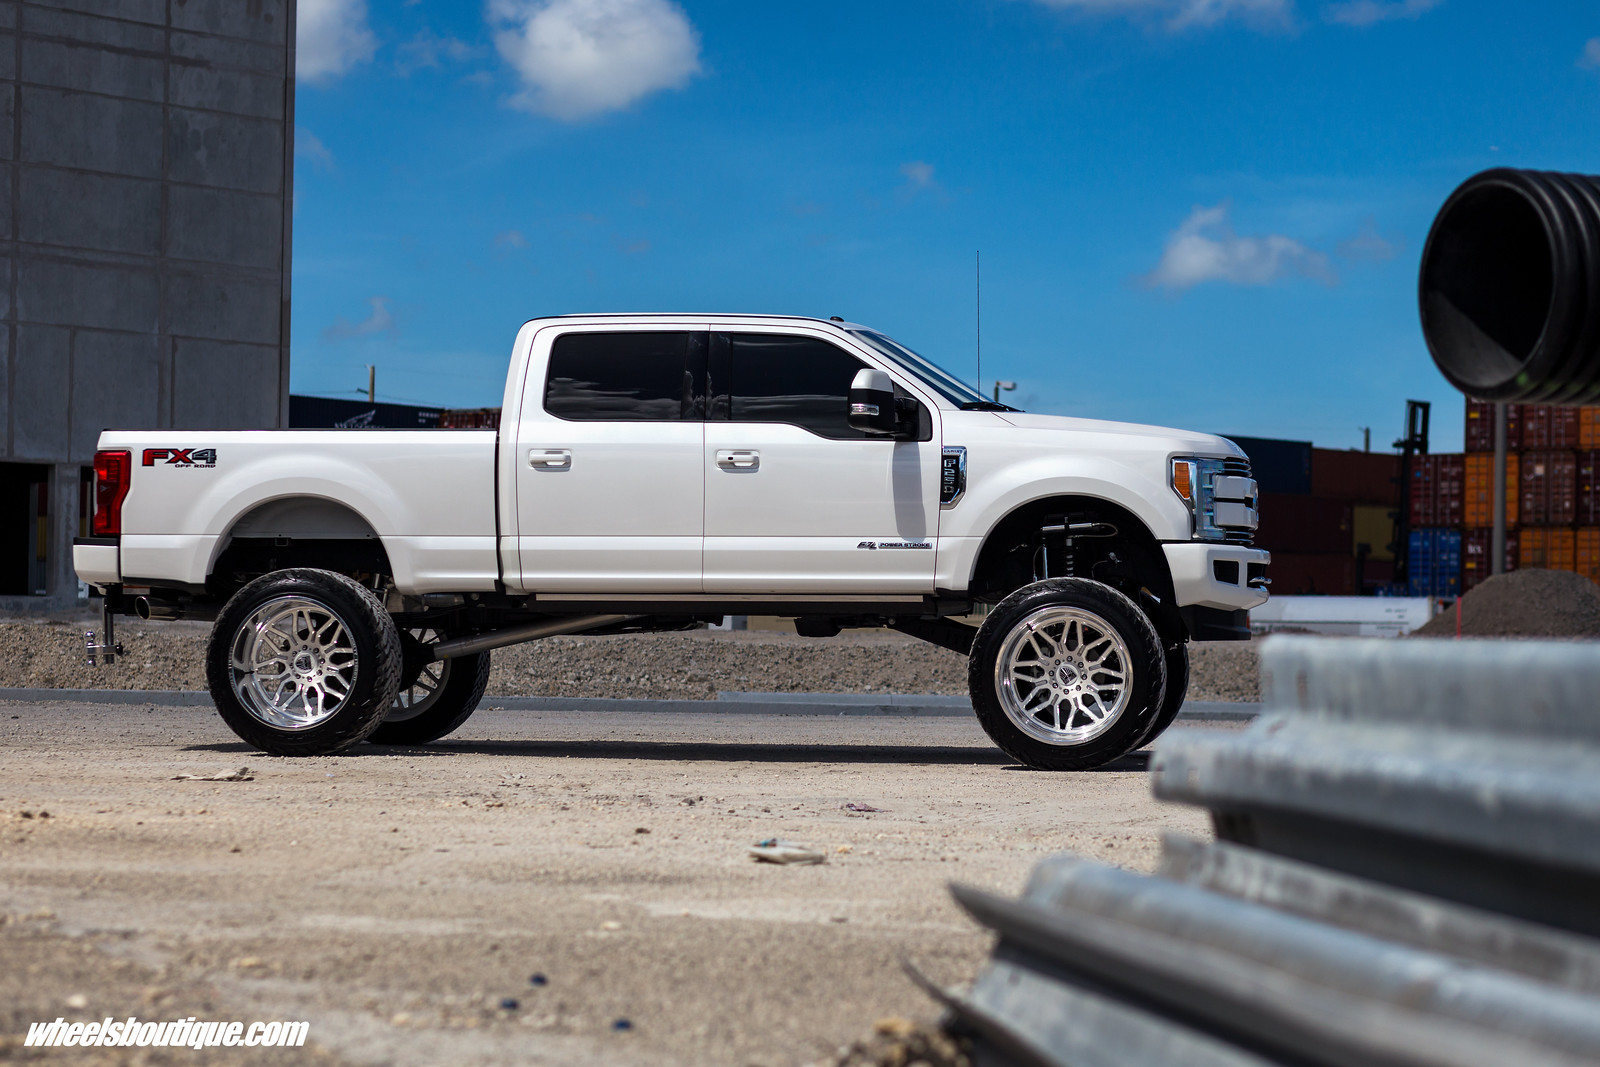 Miami Cowboy – Lifted Ford F250 Platinum by Wheels Boutique 2004 Ford F250 5.4 Oil Capacity